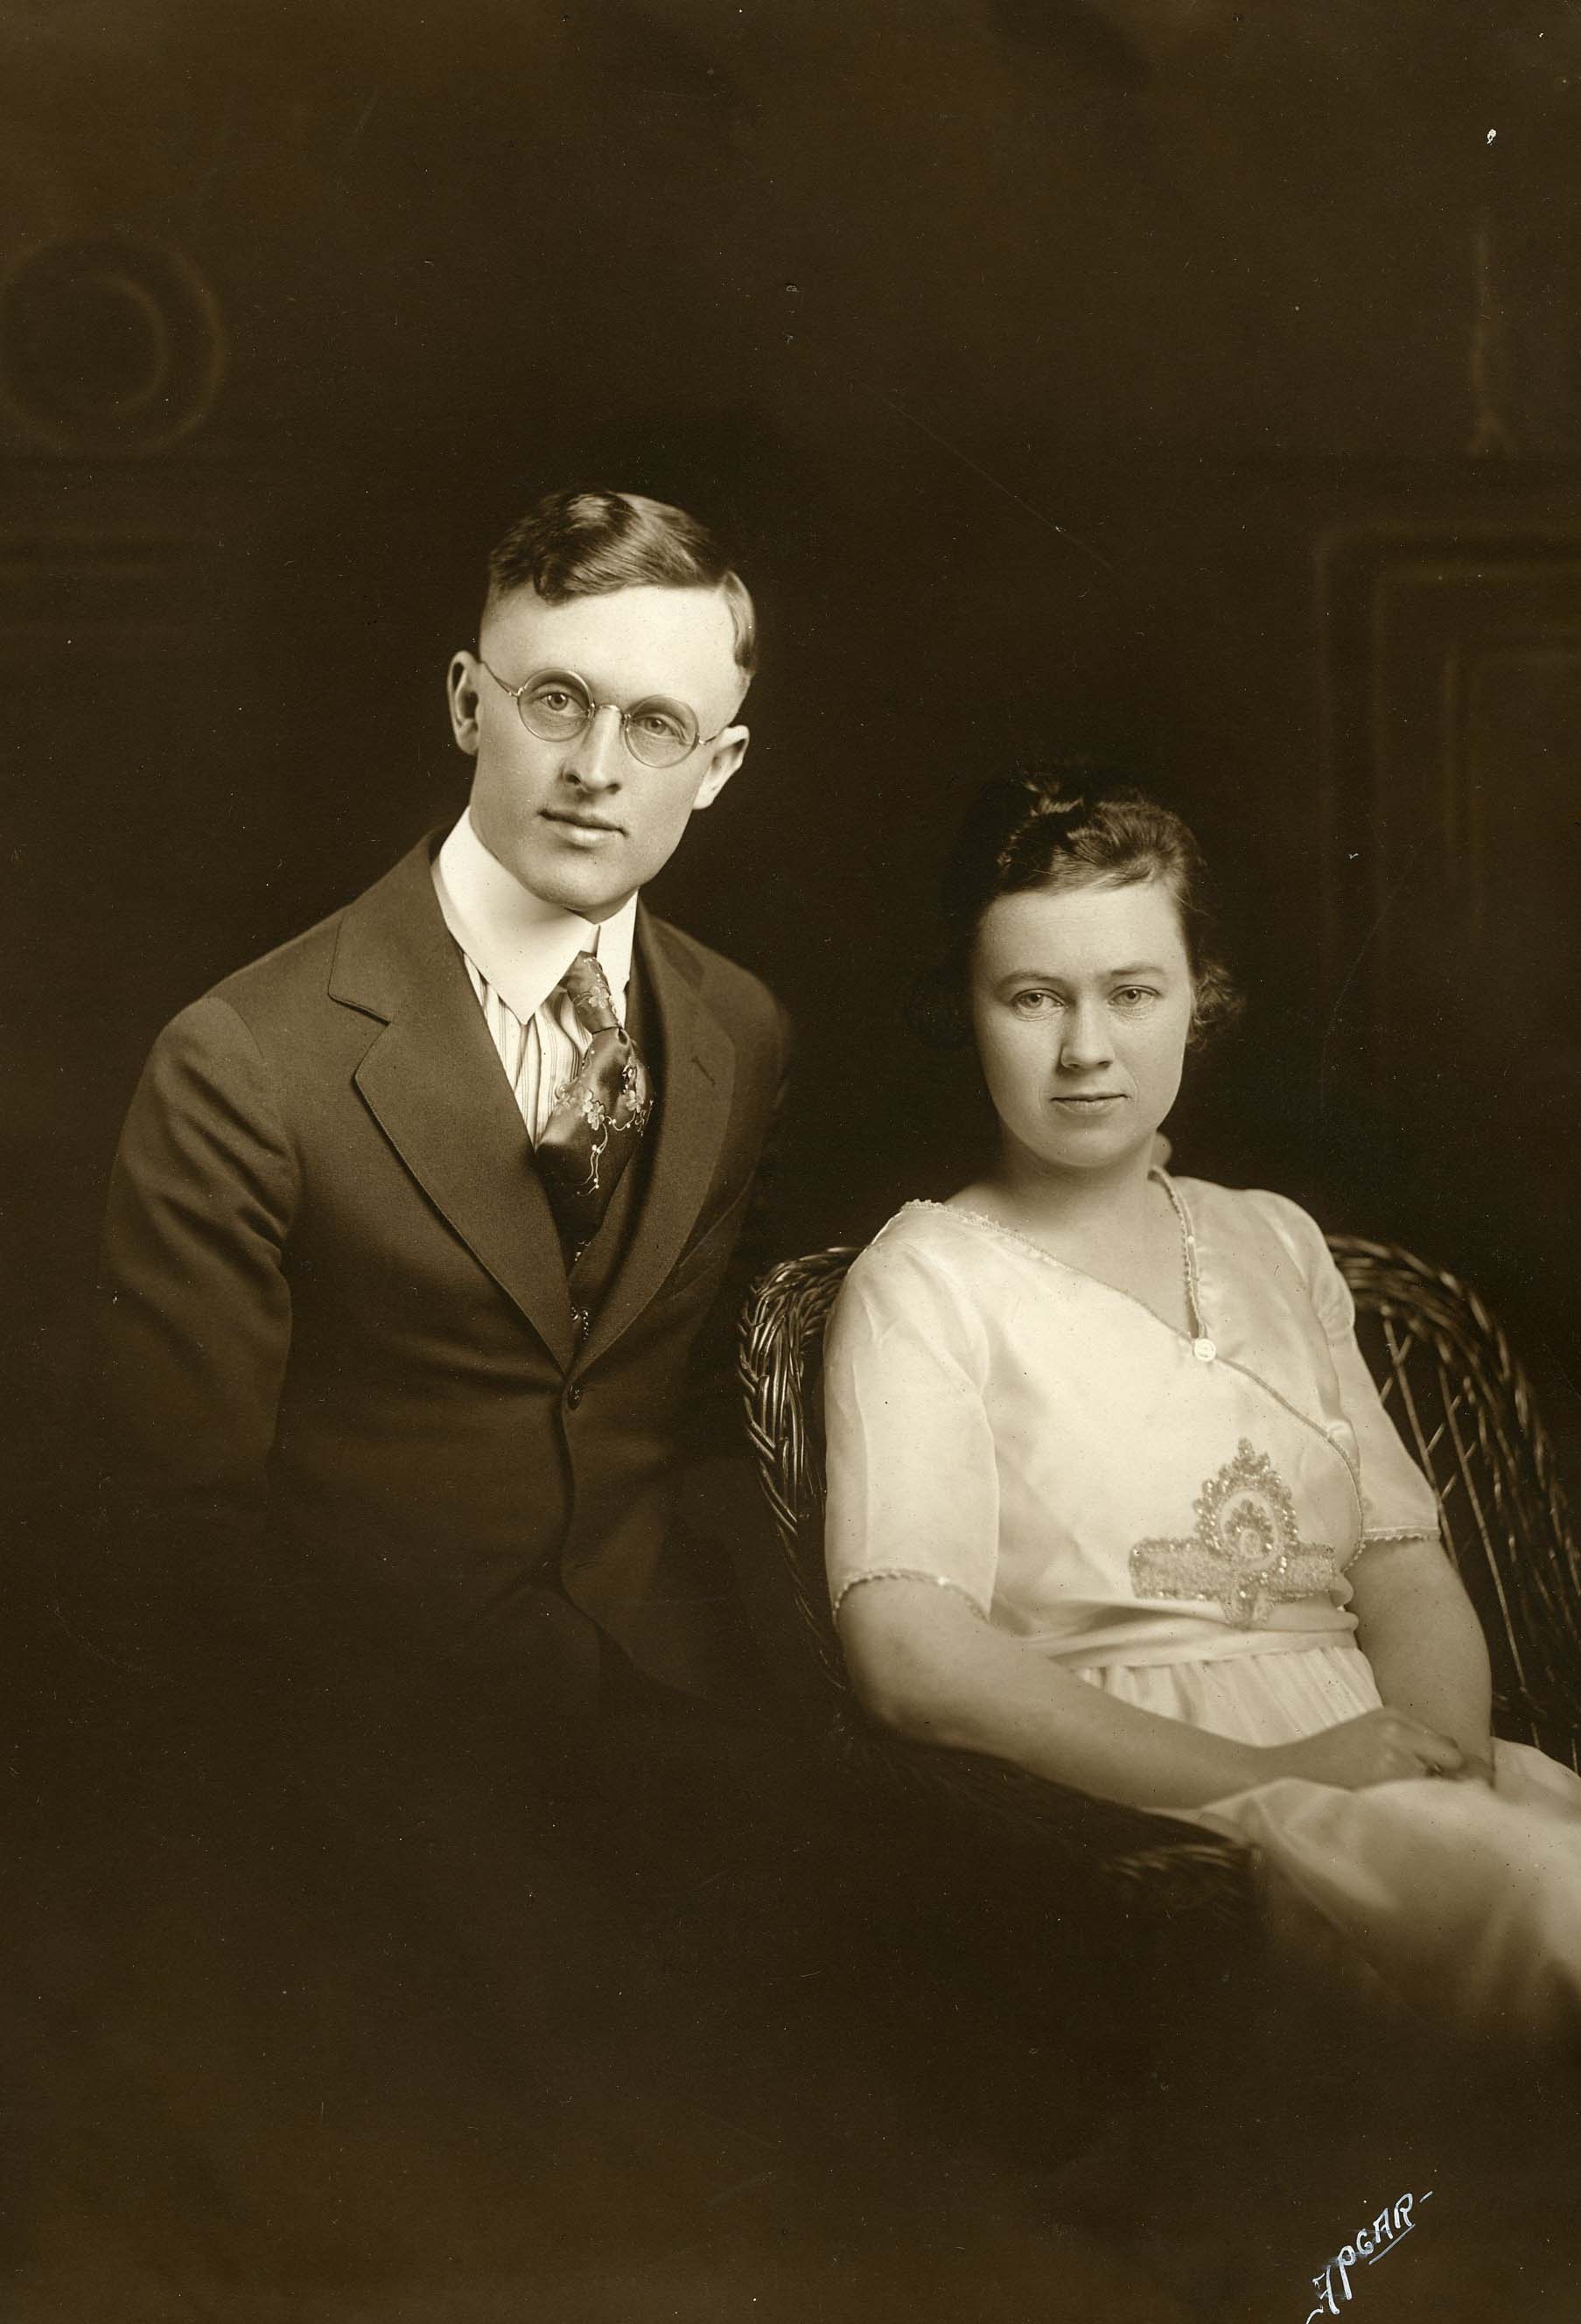 Erle and Olive Jacobson